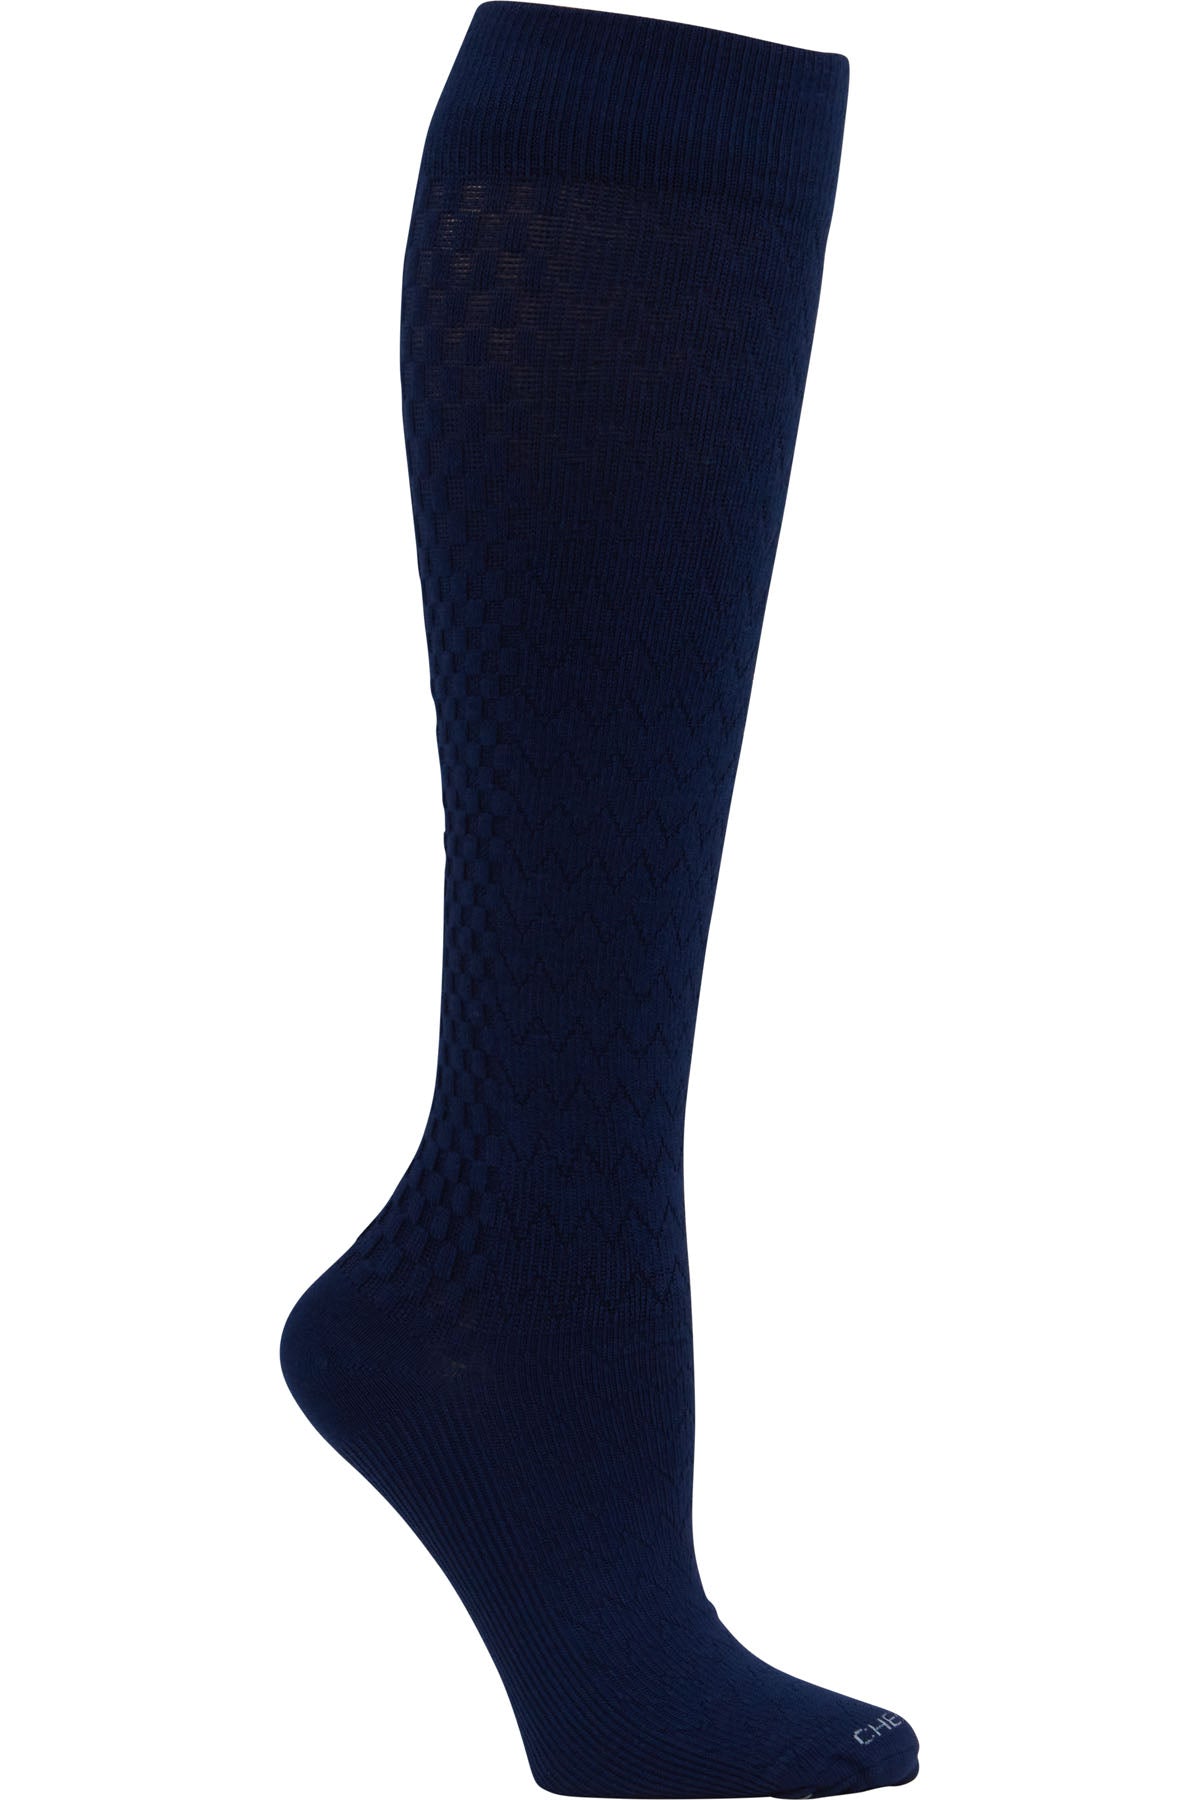 Cherokee Plus Size Mild Compression Extra Wide Calf Socks True Support 10-15 mmHg in Navy at Parker's Clothing and Shoes.